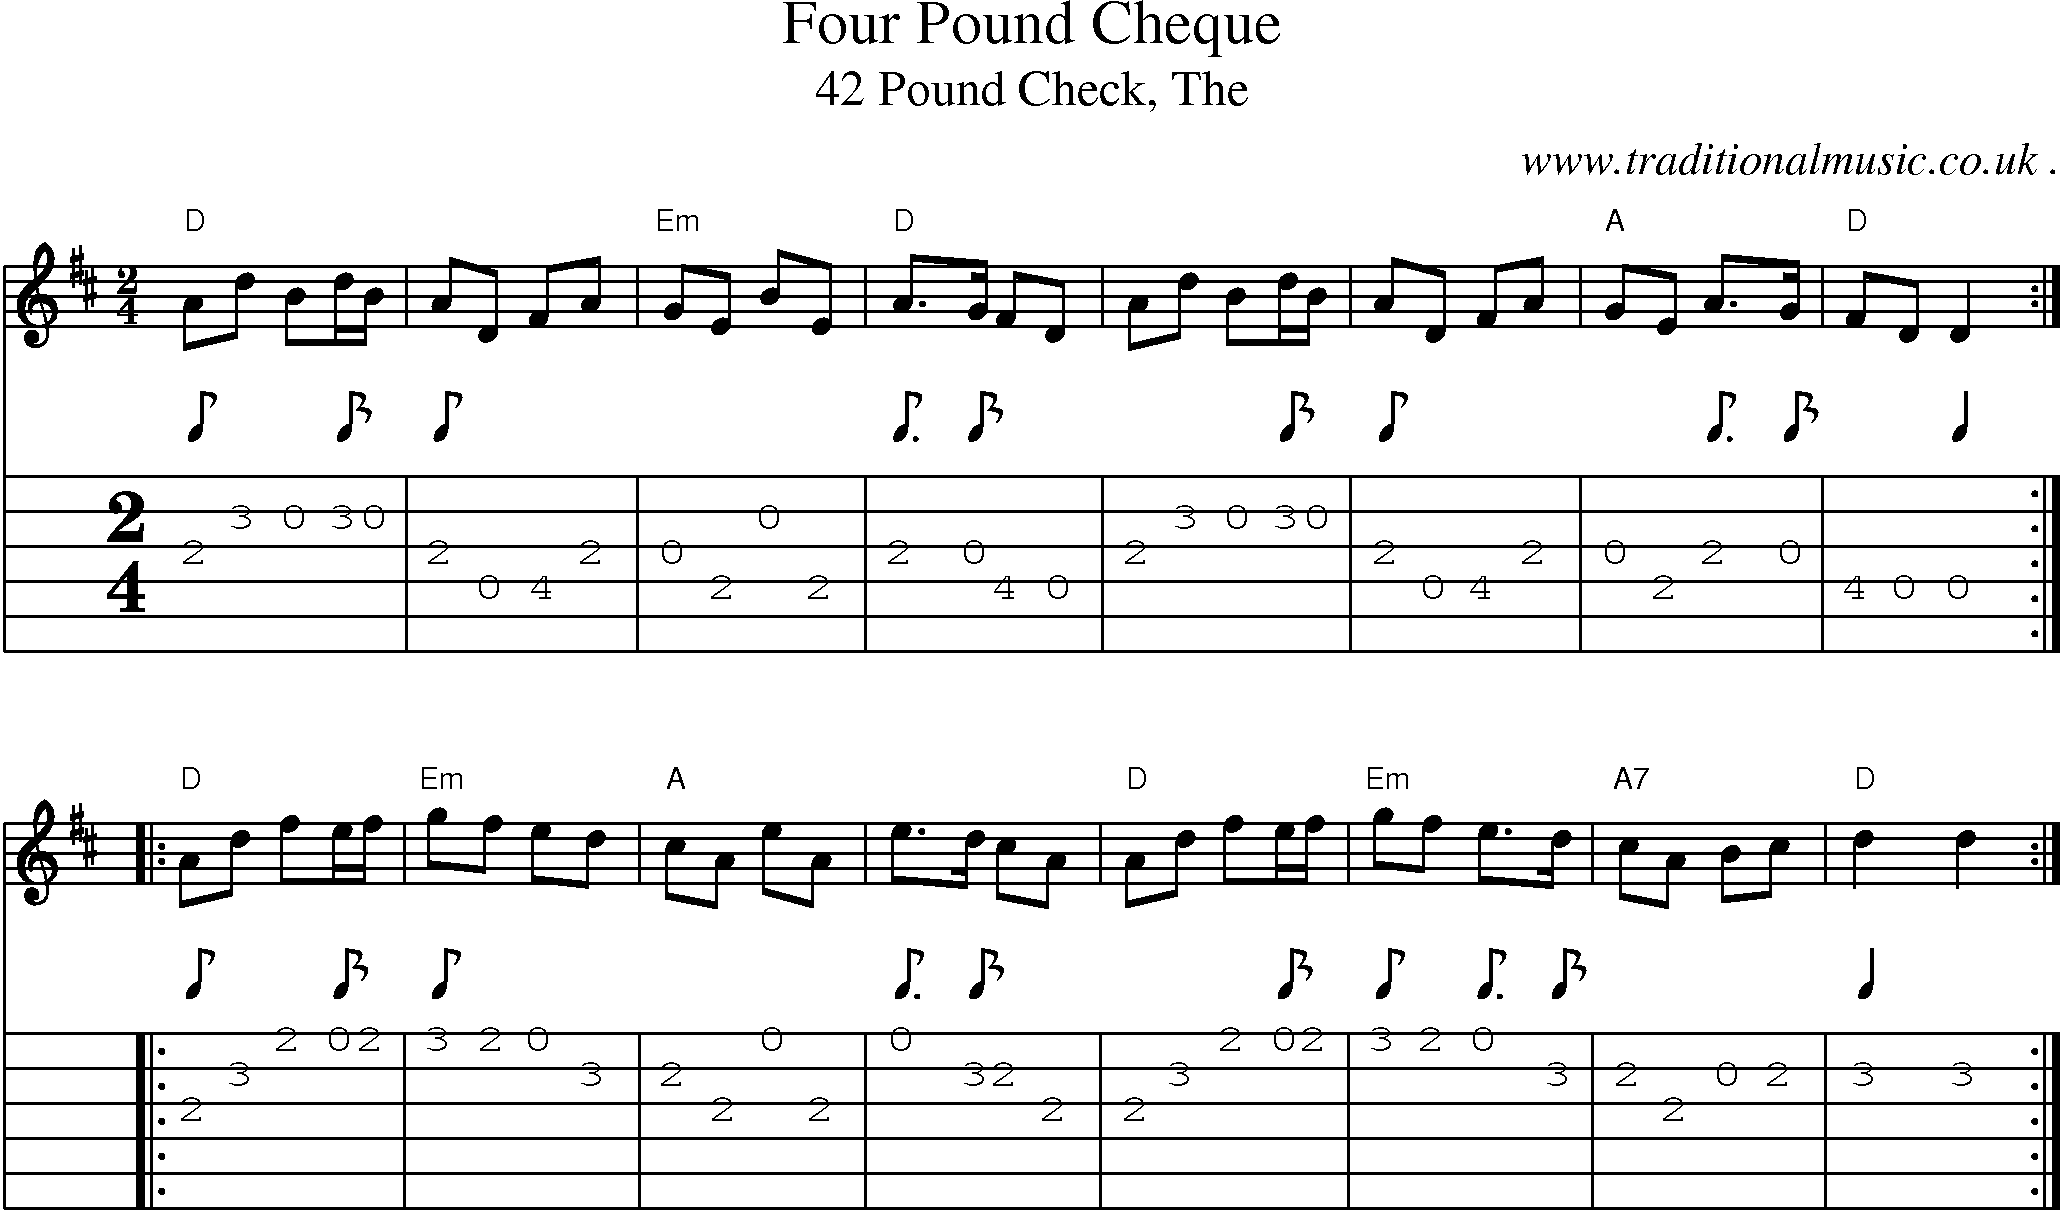 Music Score and Guitar Tabs for Four Pound Cheque